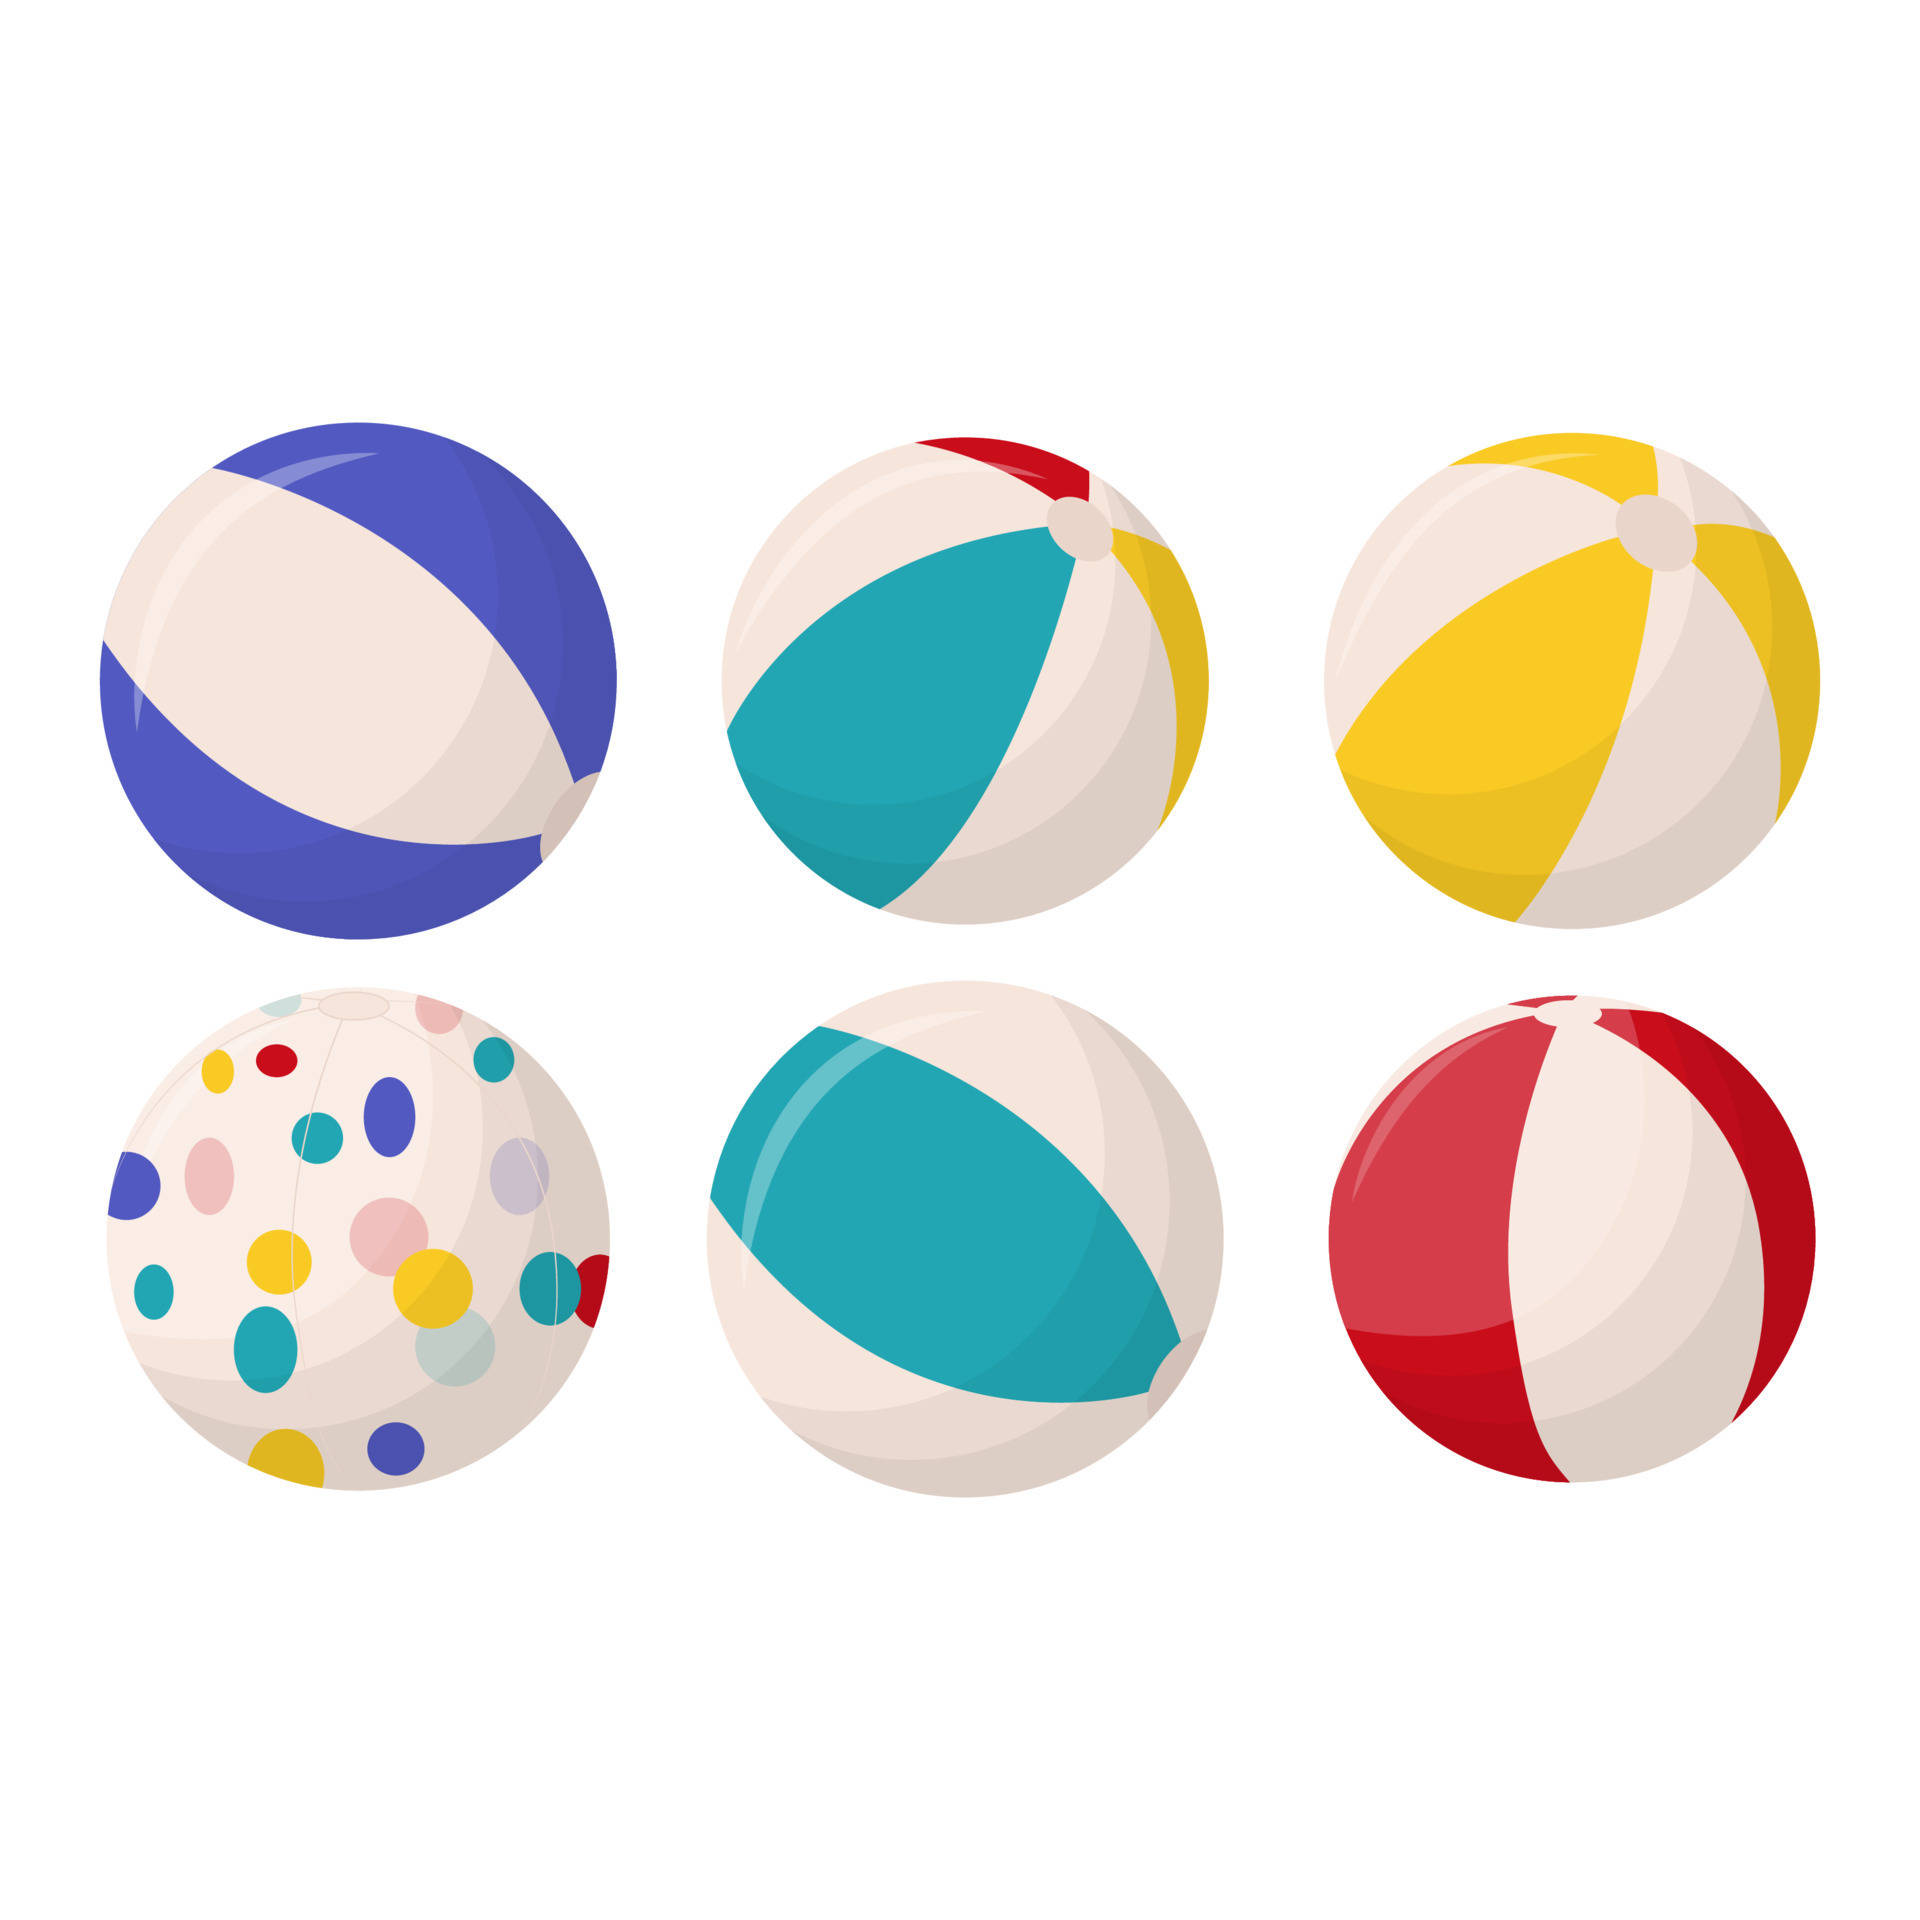 Page 44  Multicolor ball Vectors & Illustrations for Free